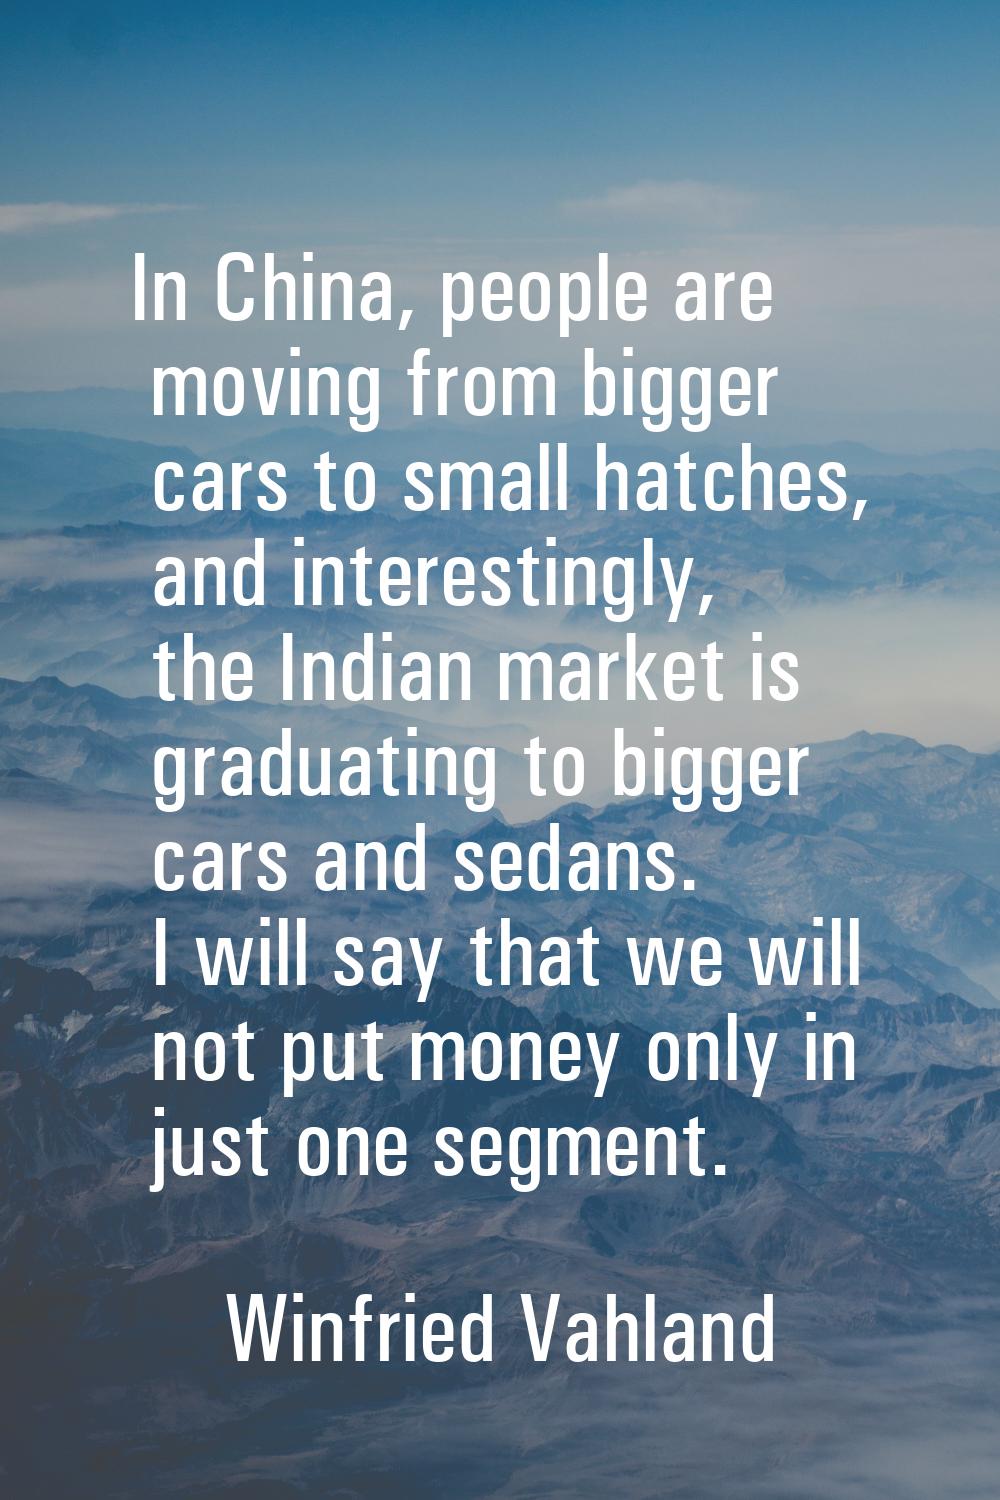 In China, people are moving from bigger cars to small hatches, and interestingly, the Indian market